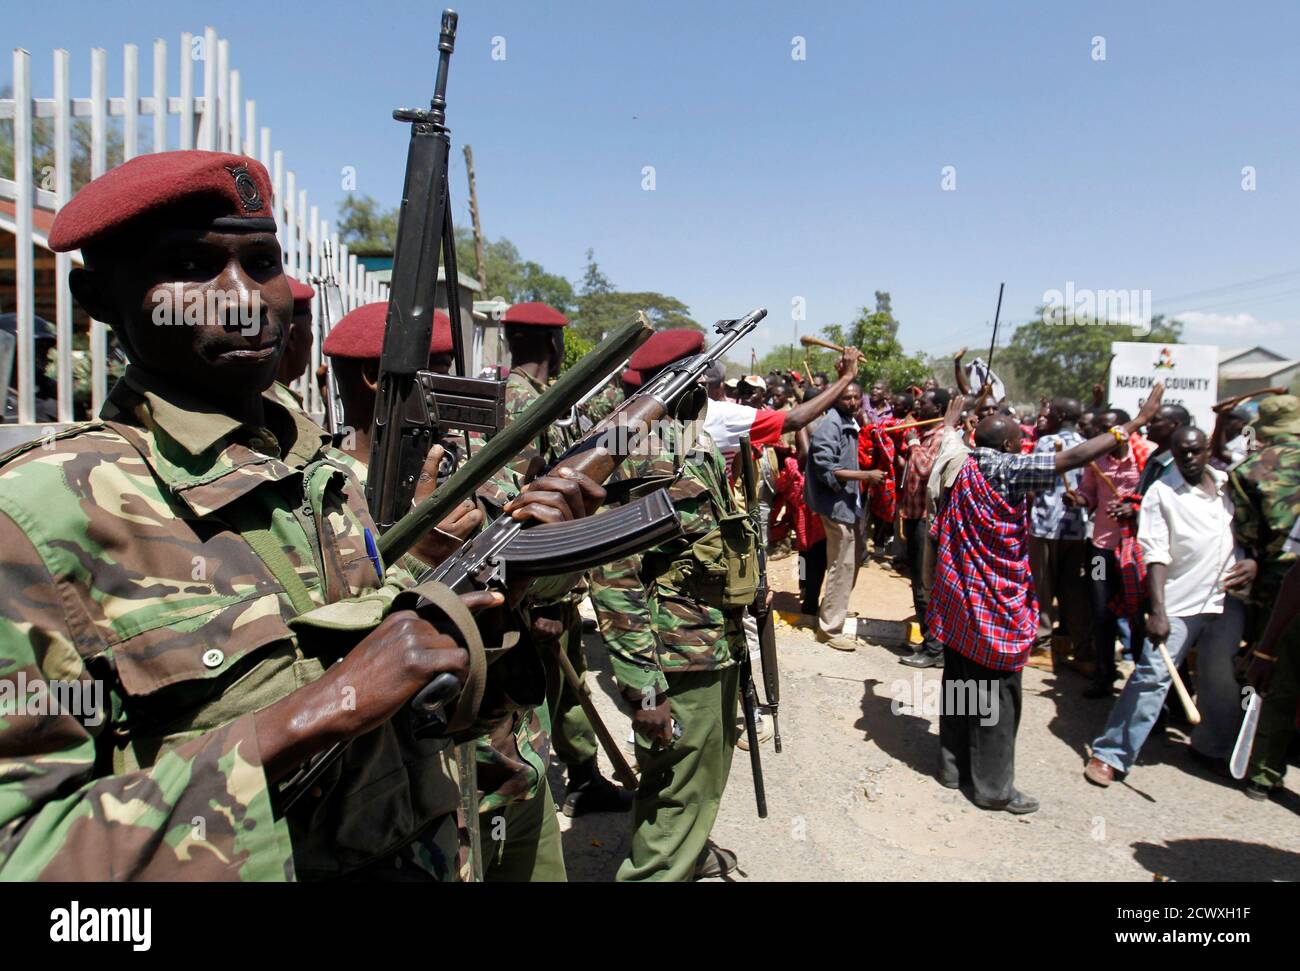 Riot policemen stand guard as they block residents chanting slogans during protests to oust Narok county Governor Samuel Tunai in Narok, Kenya, January 26, 2015.  At least seven people were injured on Monday in clashes between Kenyan police and protesters from the Maasai ethnic group who accuse a local governor of corrupt handling of tourism funds from the Maasai Mara game reserve, the Kenya Red Cross said. REUTERS/Thomas Mukoya (KENYA - Tags: CIVIL UNREST CRIME LAW POLITICS) Stock Photo